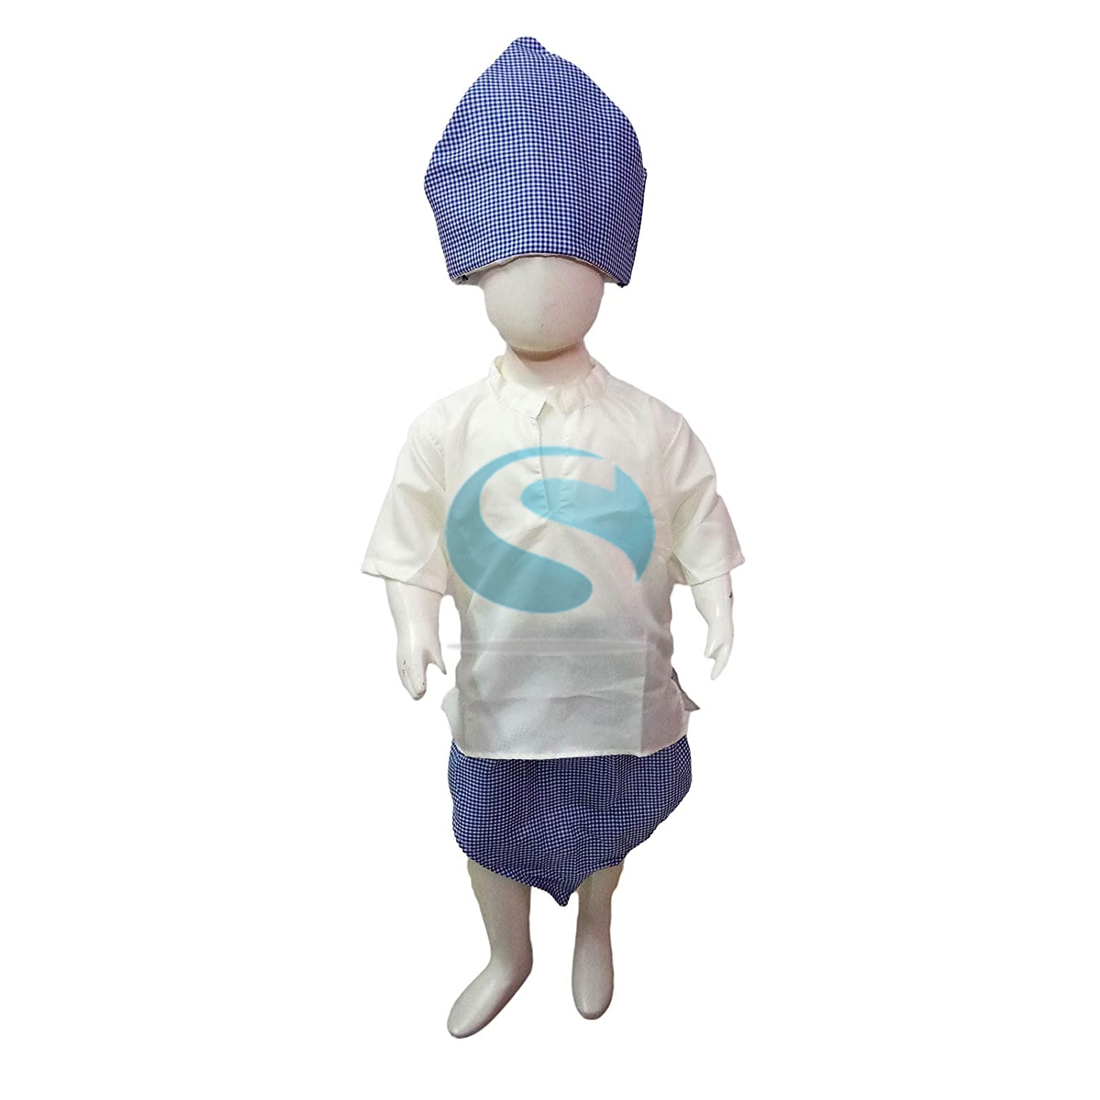 Rent or Buy Chef Profession Kids Fancy Dress Costume Online in India